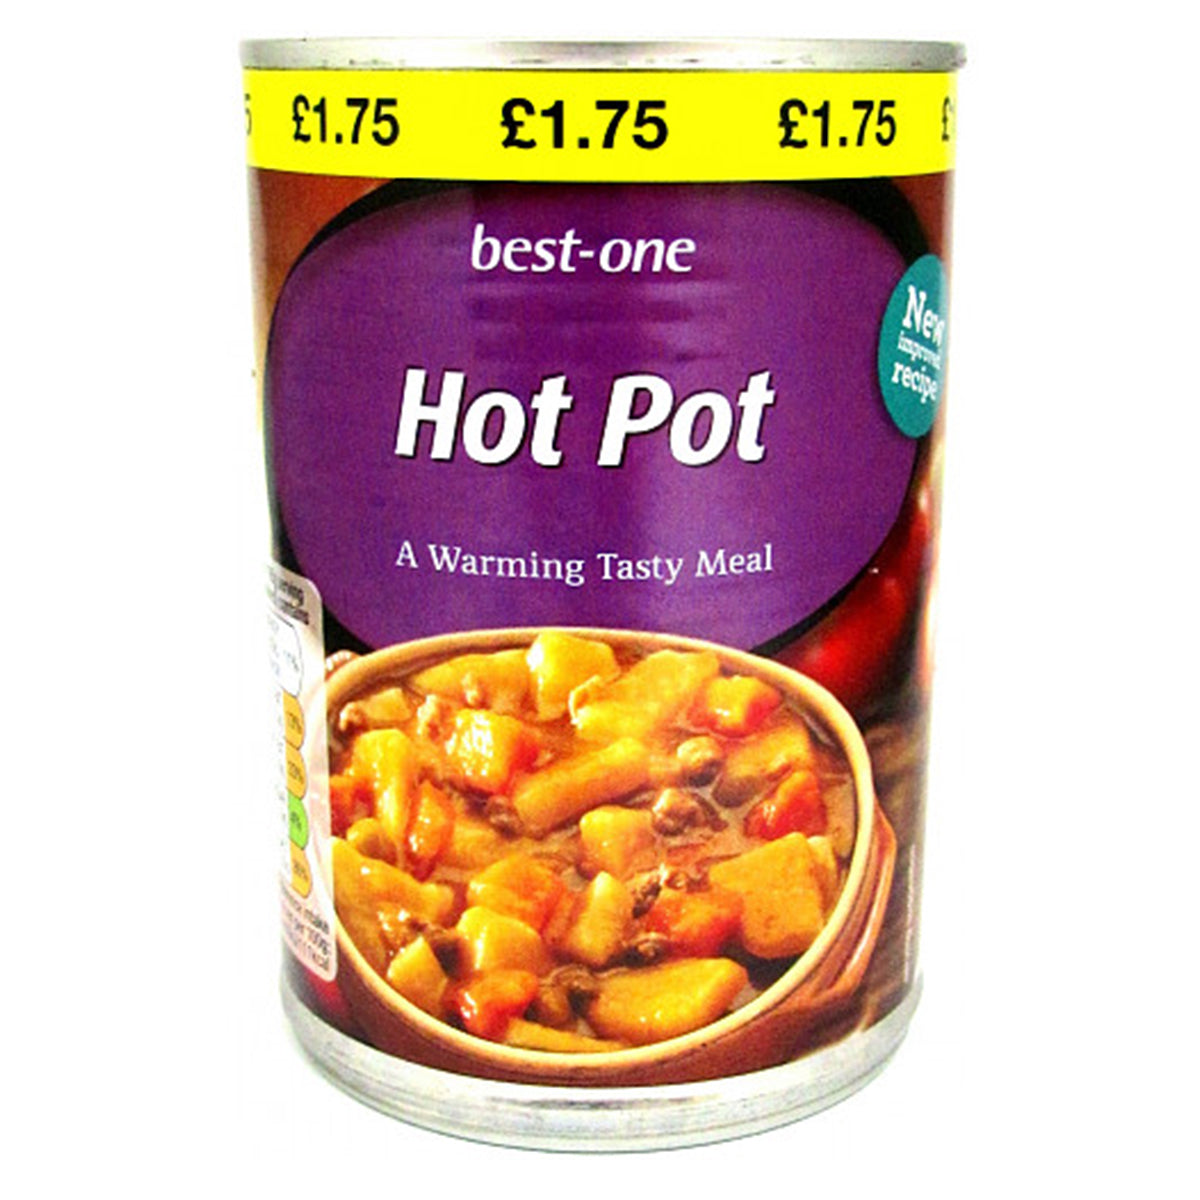 A can of Best-One Hot Pot (390g) on a white background.